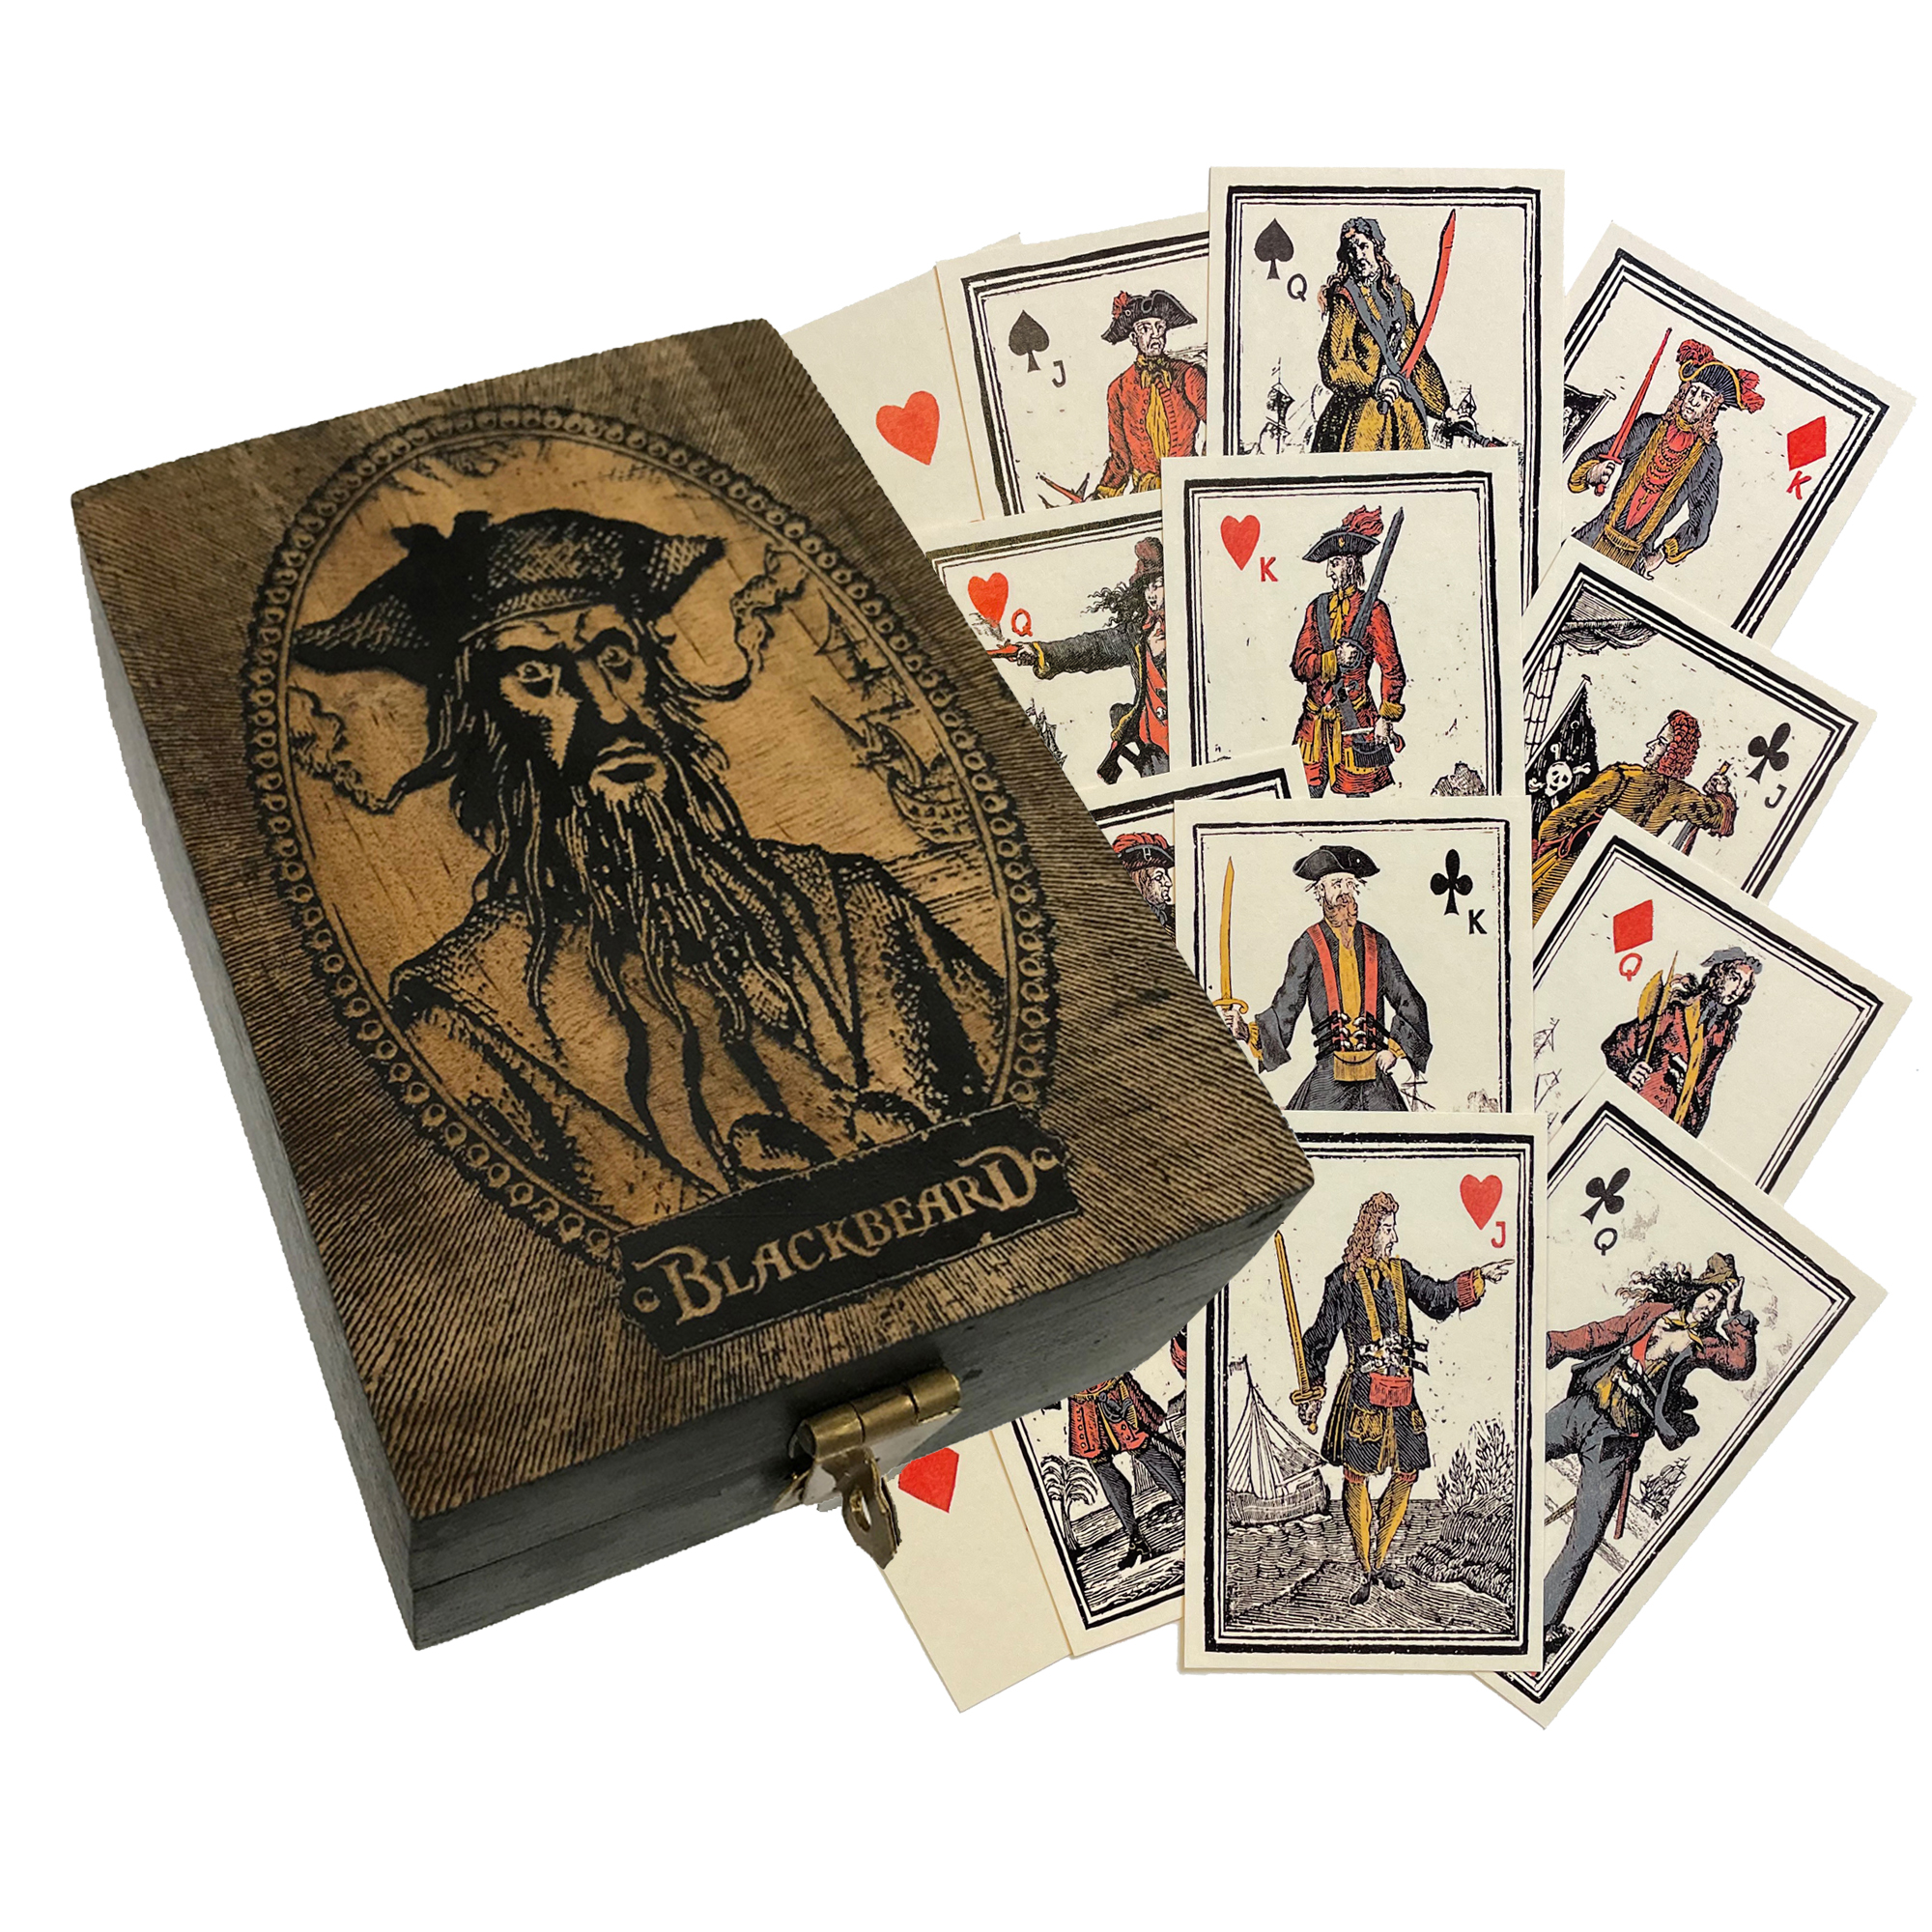 Pirate-Themed　Playing　with　Portrait　Edward　Box　Blackbeard　Wood　Teach　Engraved　Schooner　Bay　Vintage　Cards-　Style　Antique　Company